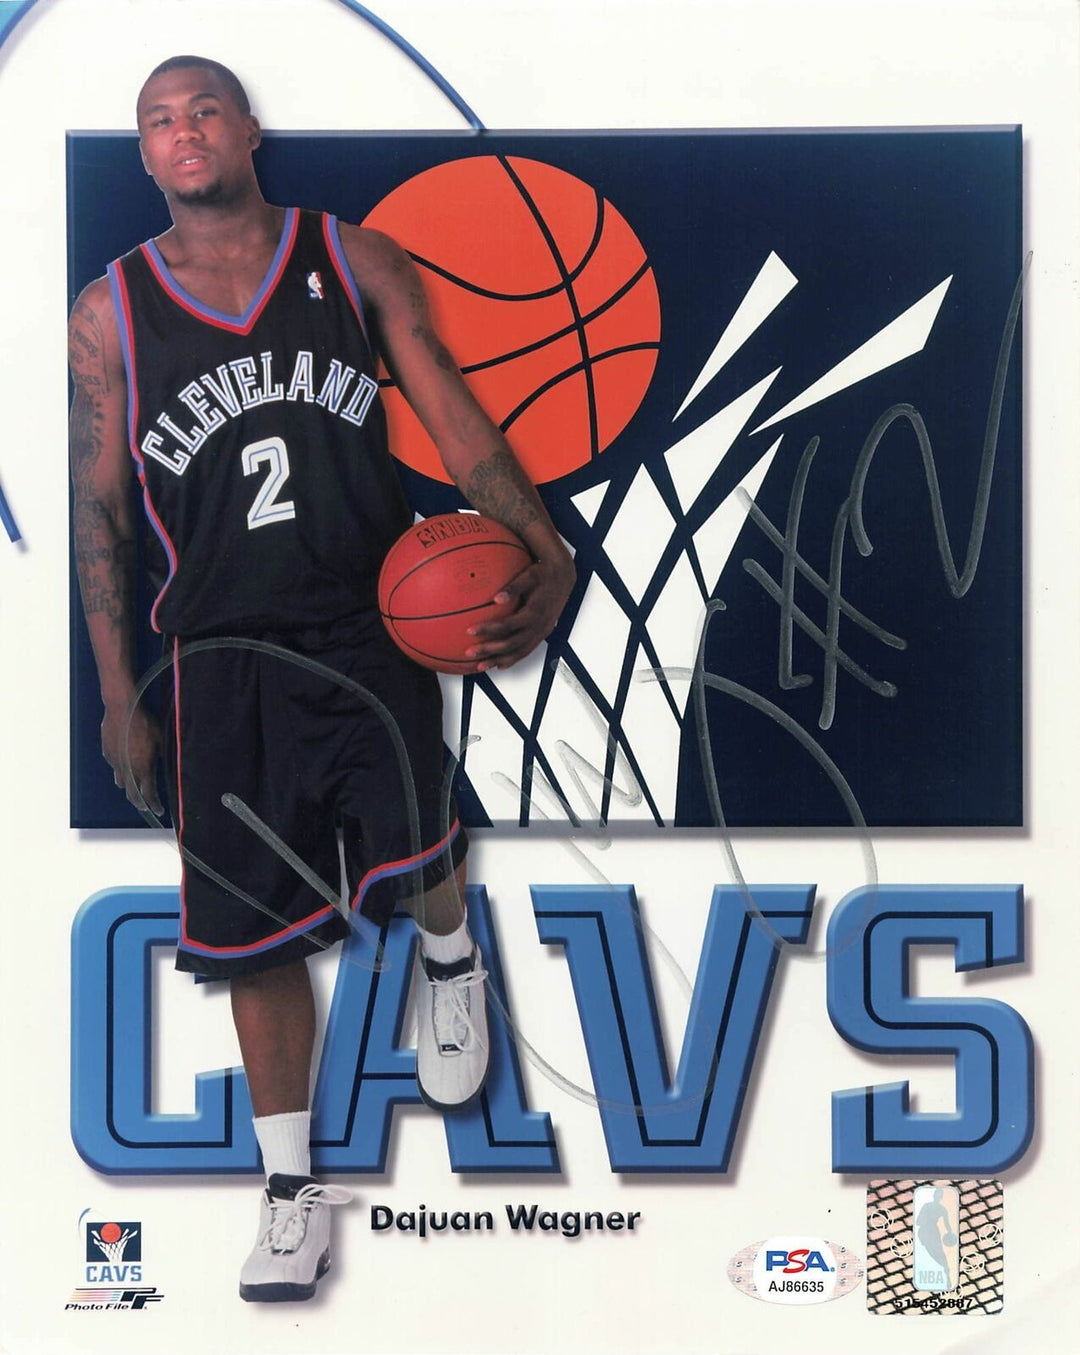 Dajuan Wagner Signed 8x10 photo PSA/DNA Cleveland Cavaliers Autographed Image 1